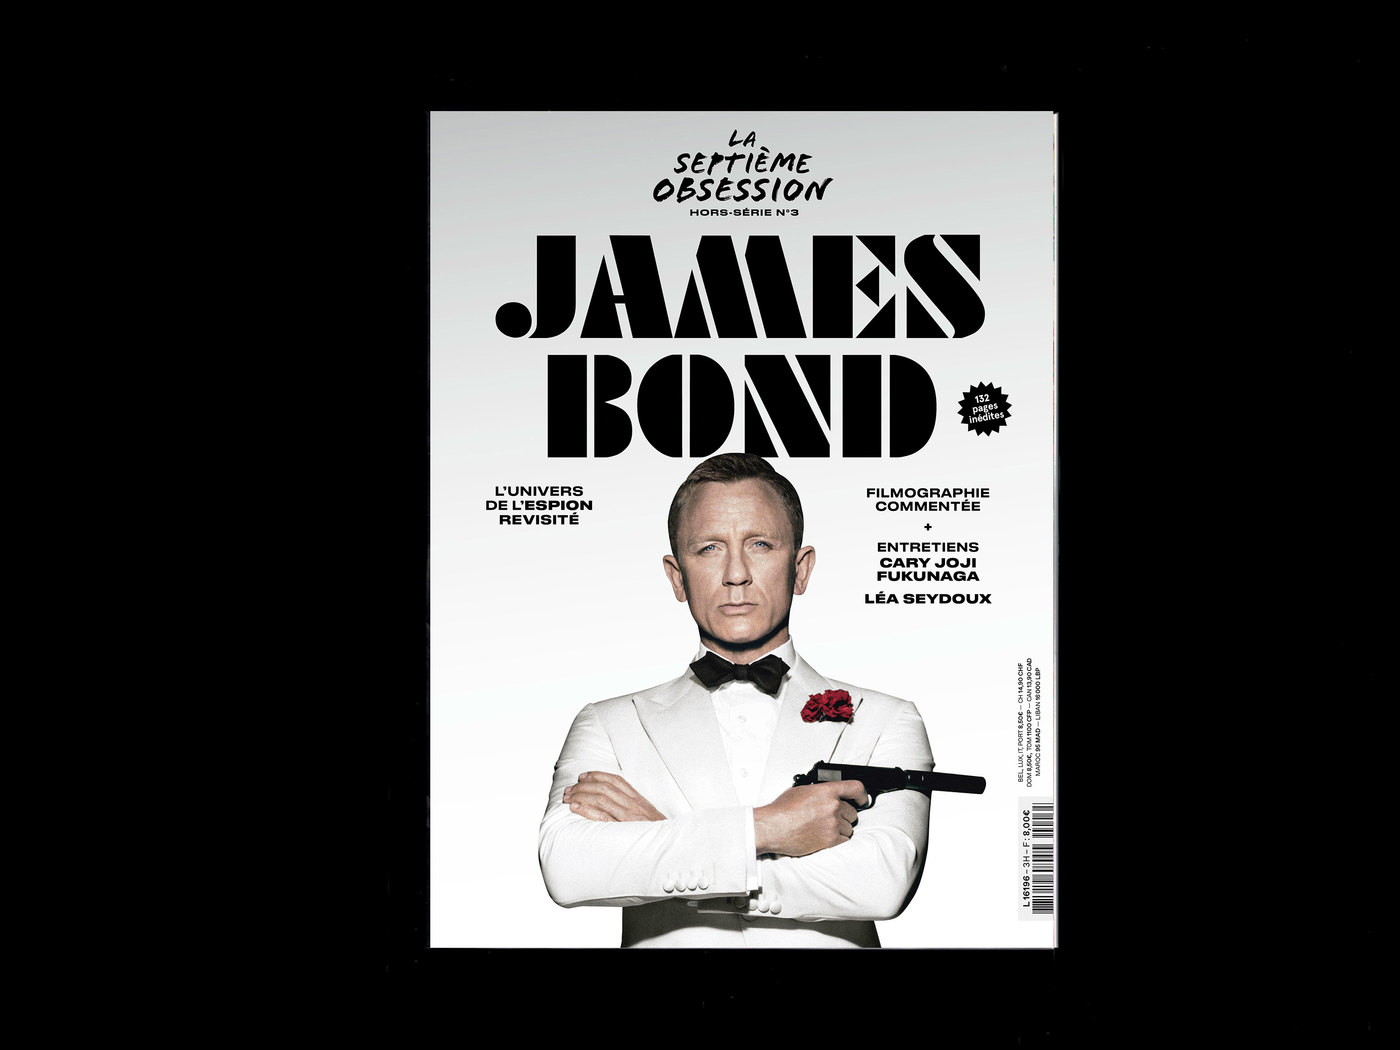 La Septième Obsession, “James Bond” issue - Fonts In Use